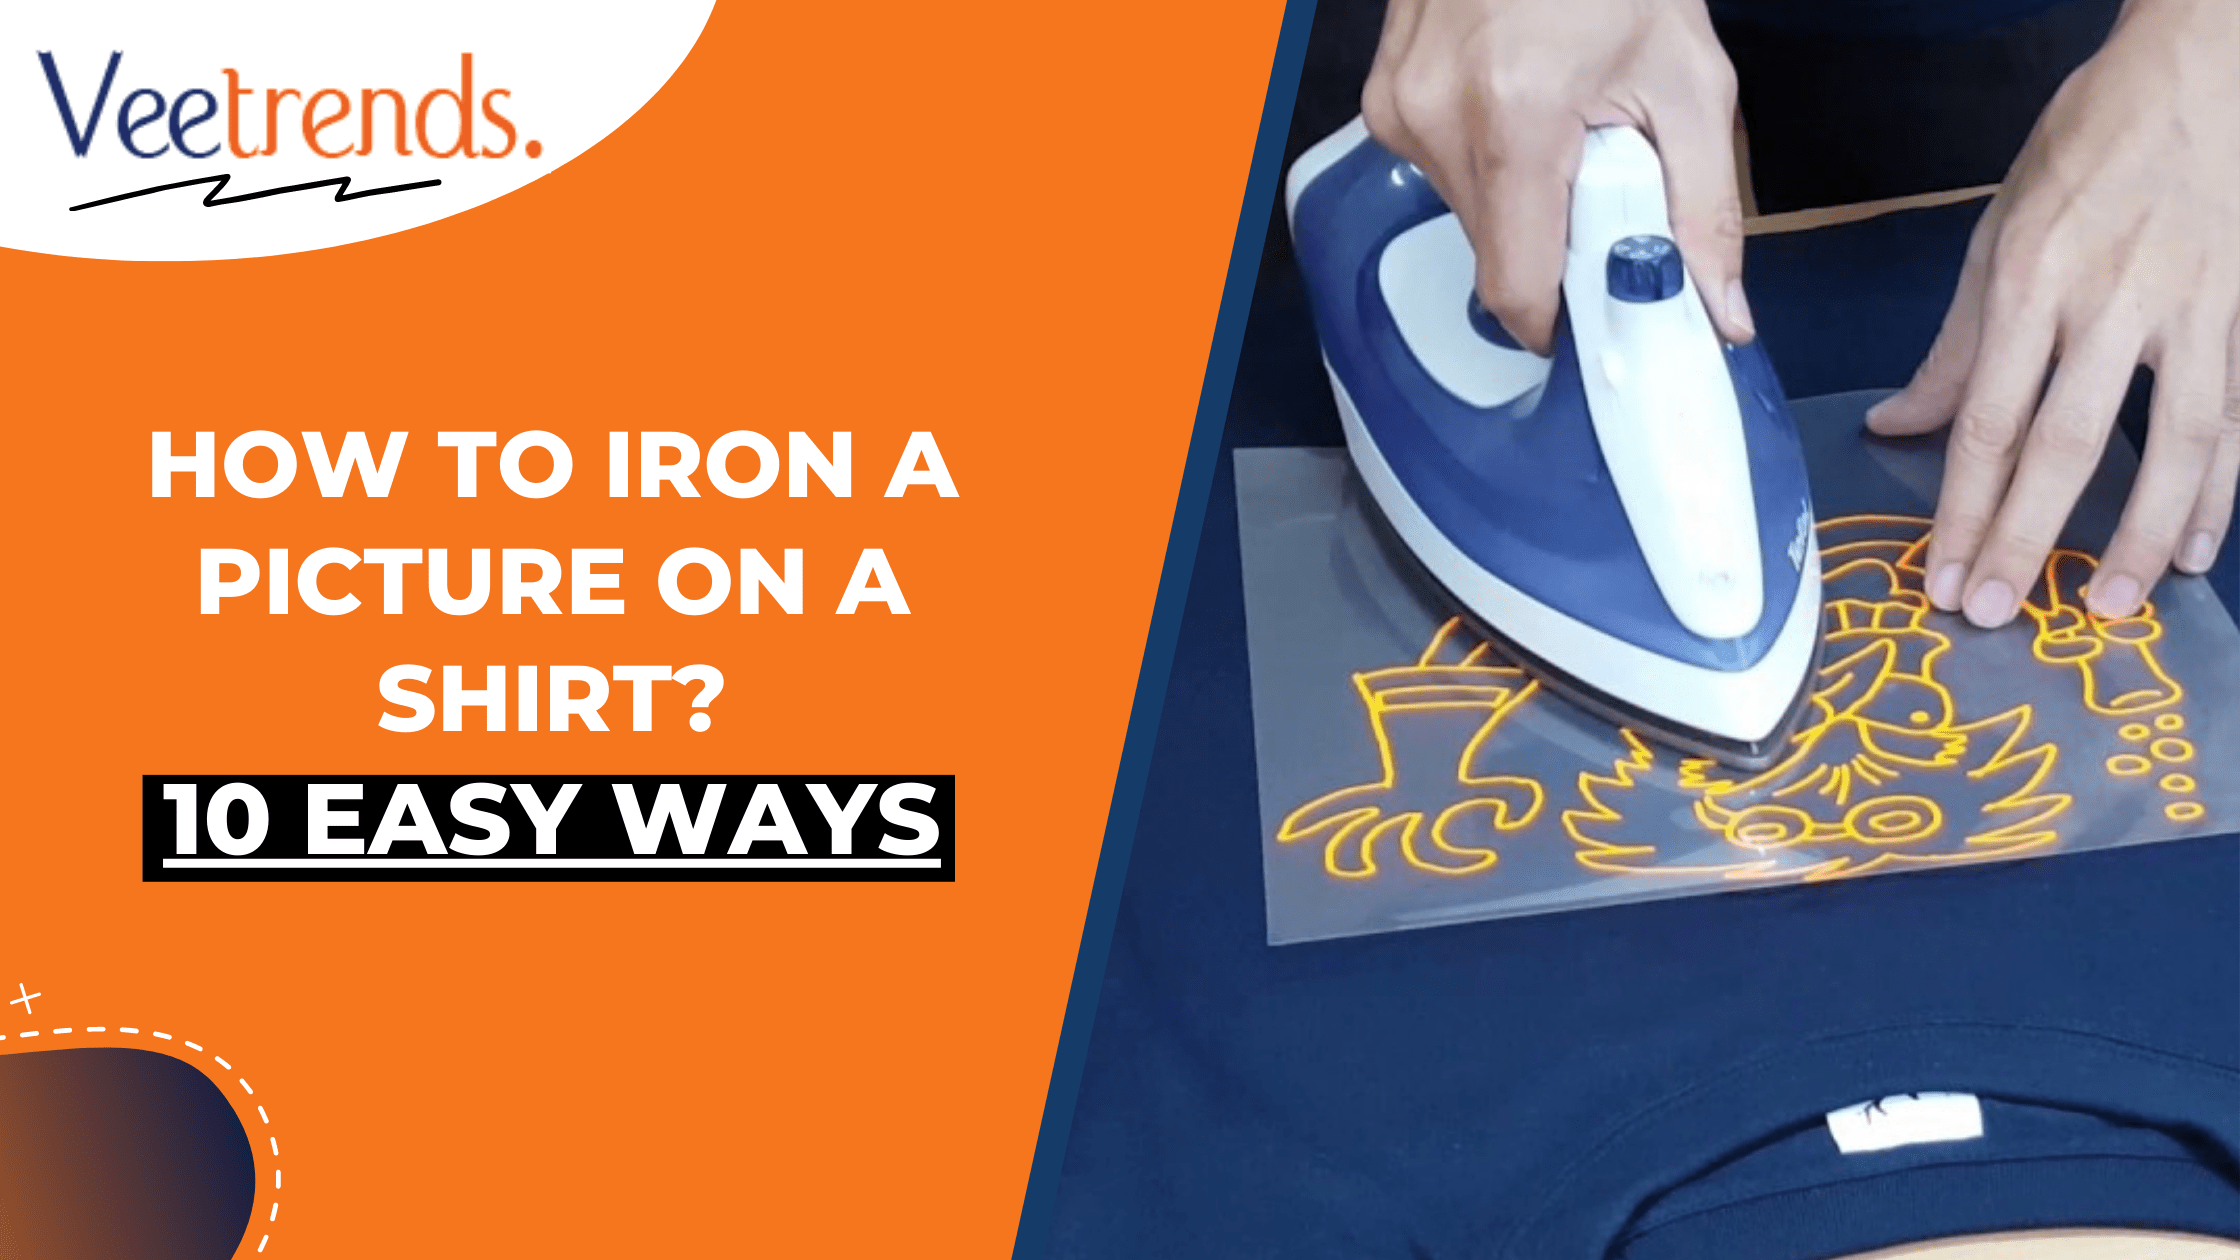 How To Iron A Picture On Shirt? 10 Easy Ways